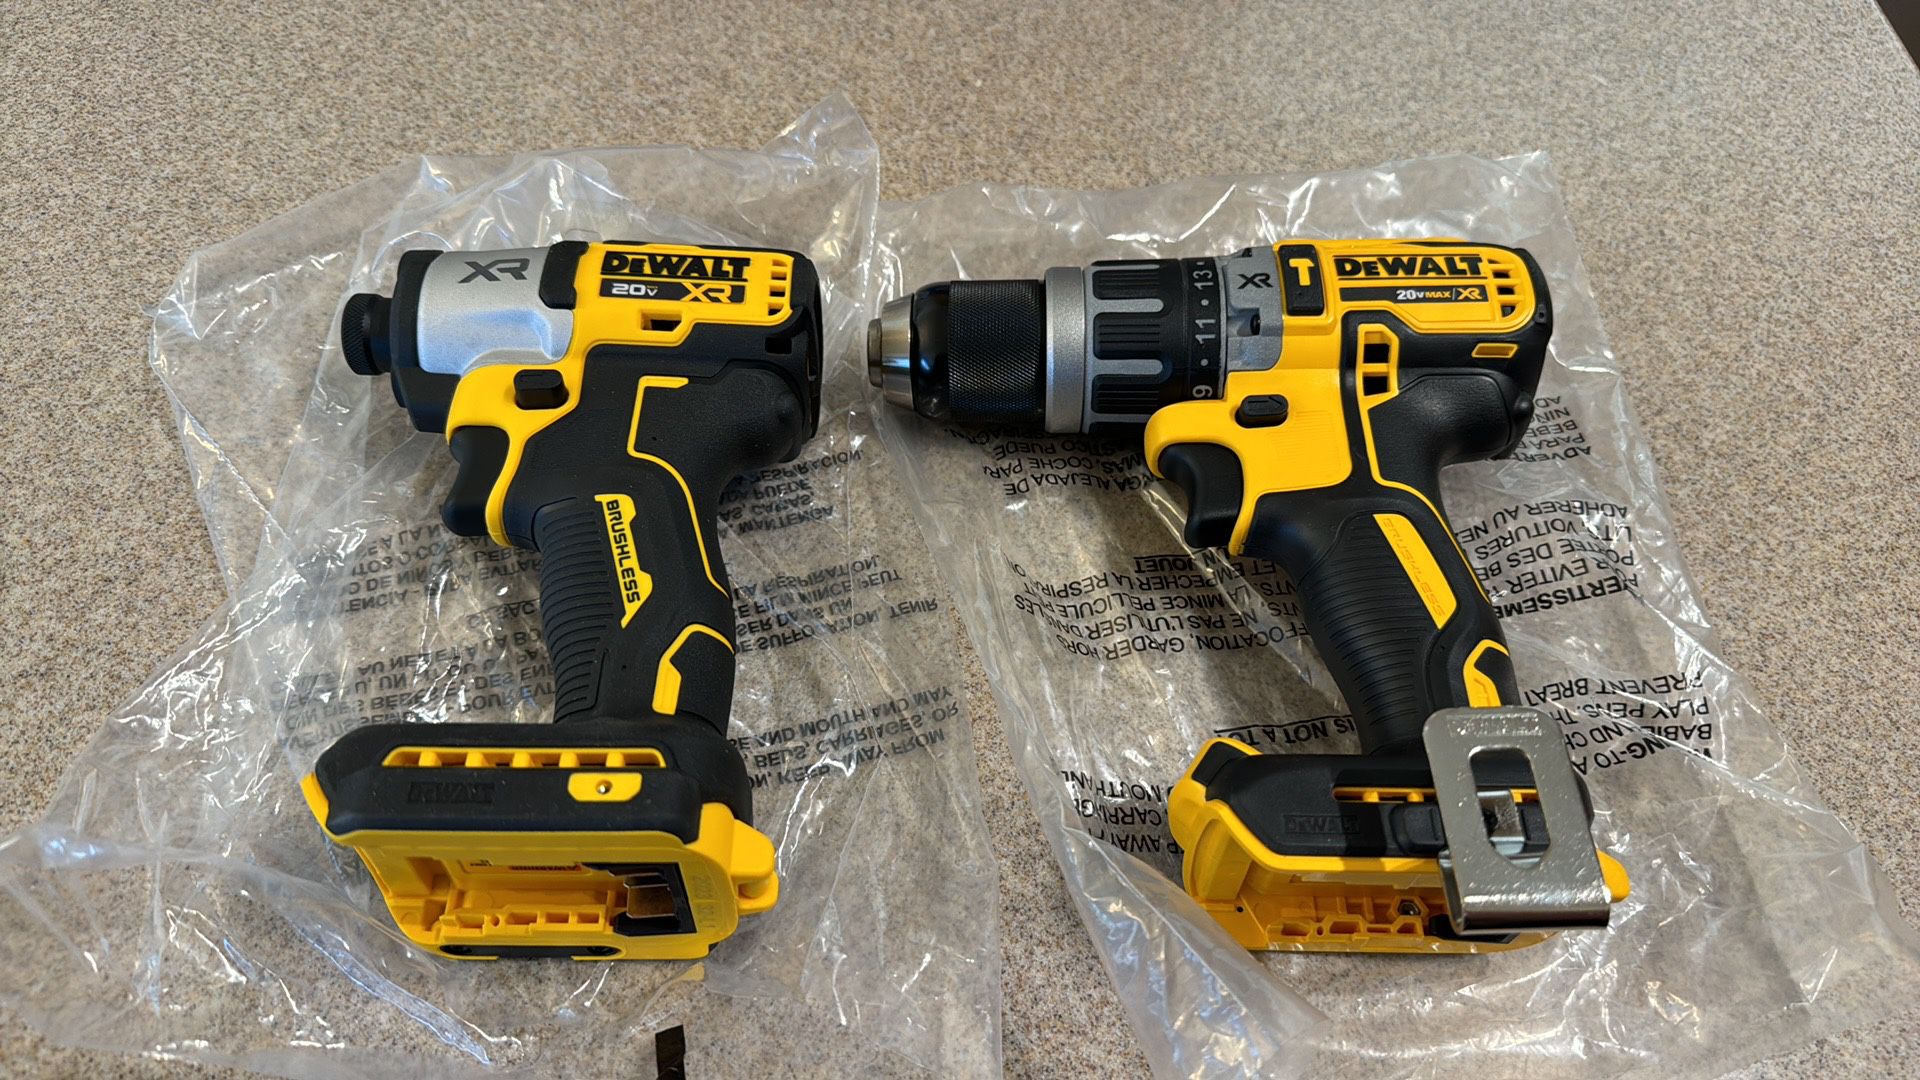 Brand new Dewalt 20V XR impact driver and hammer drill, tool only